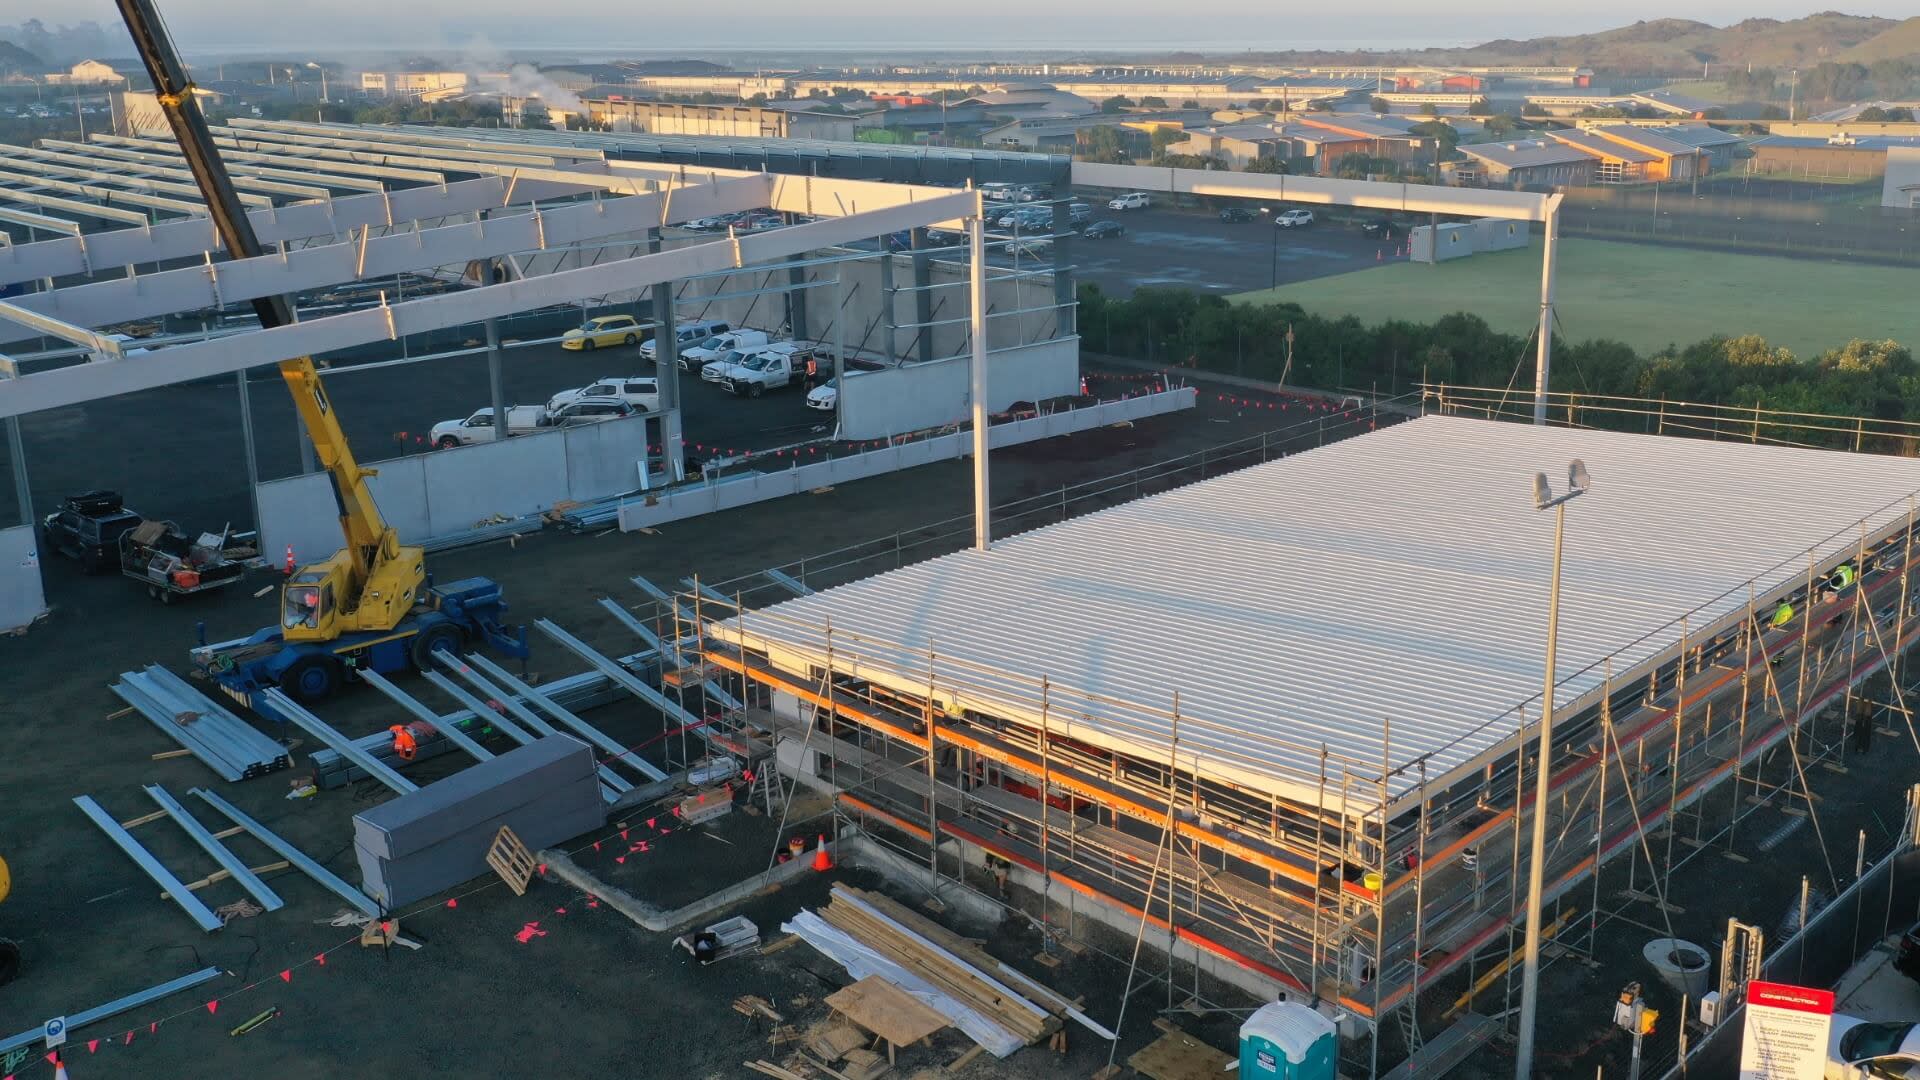 Aerial view of a construction site in progress